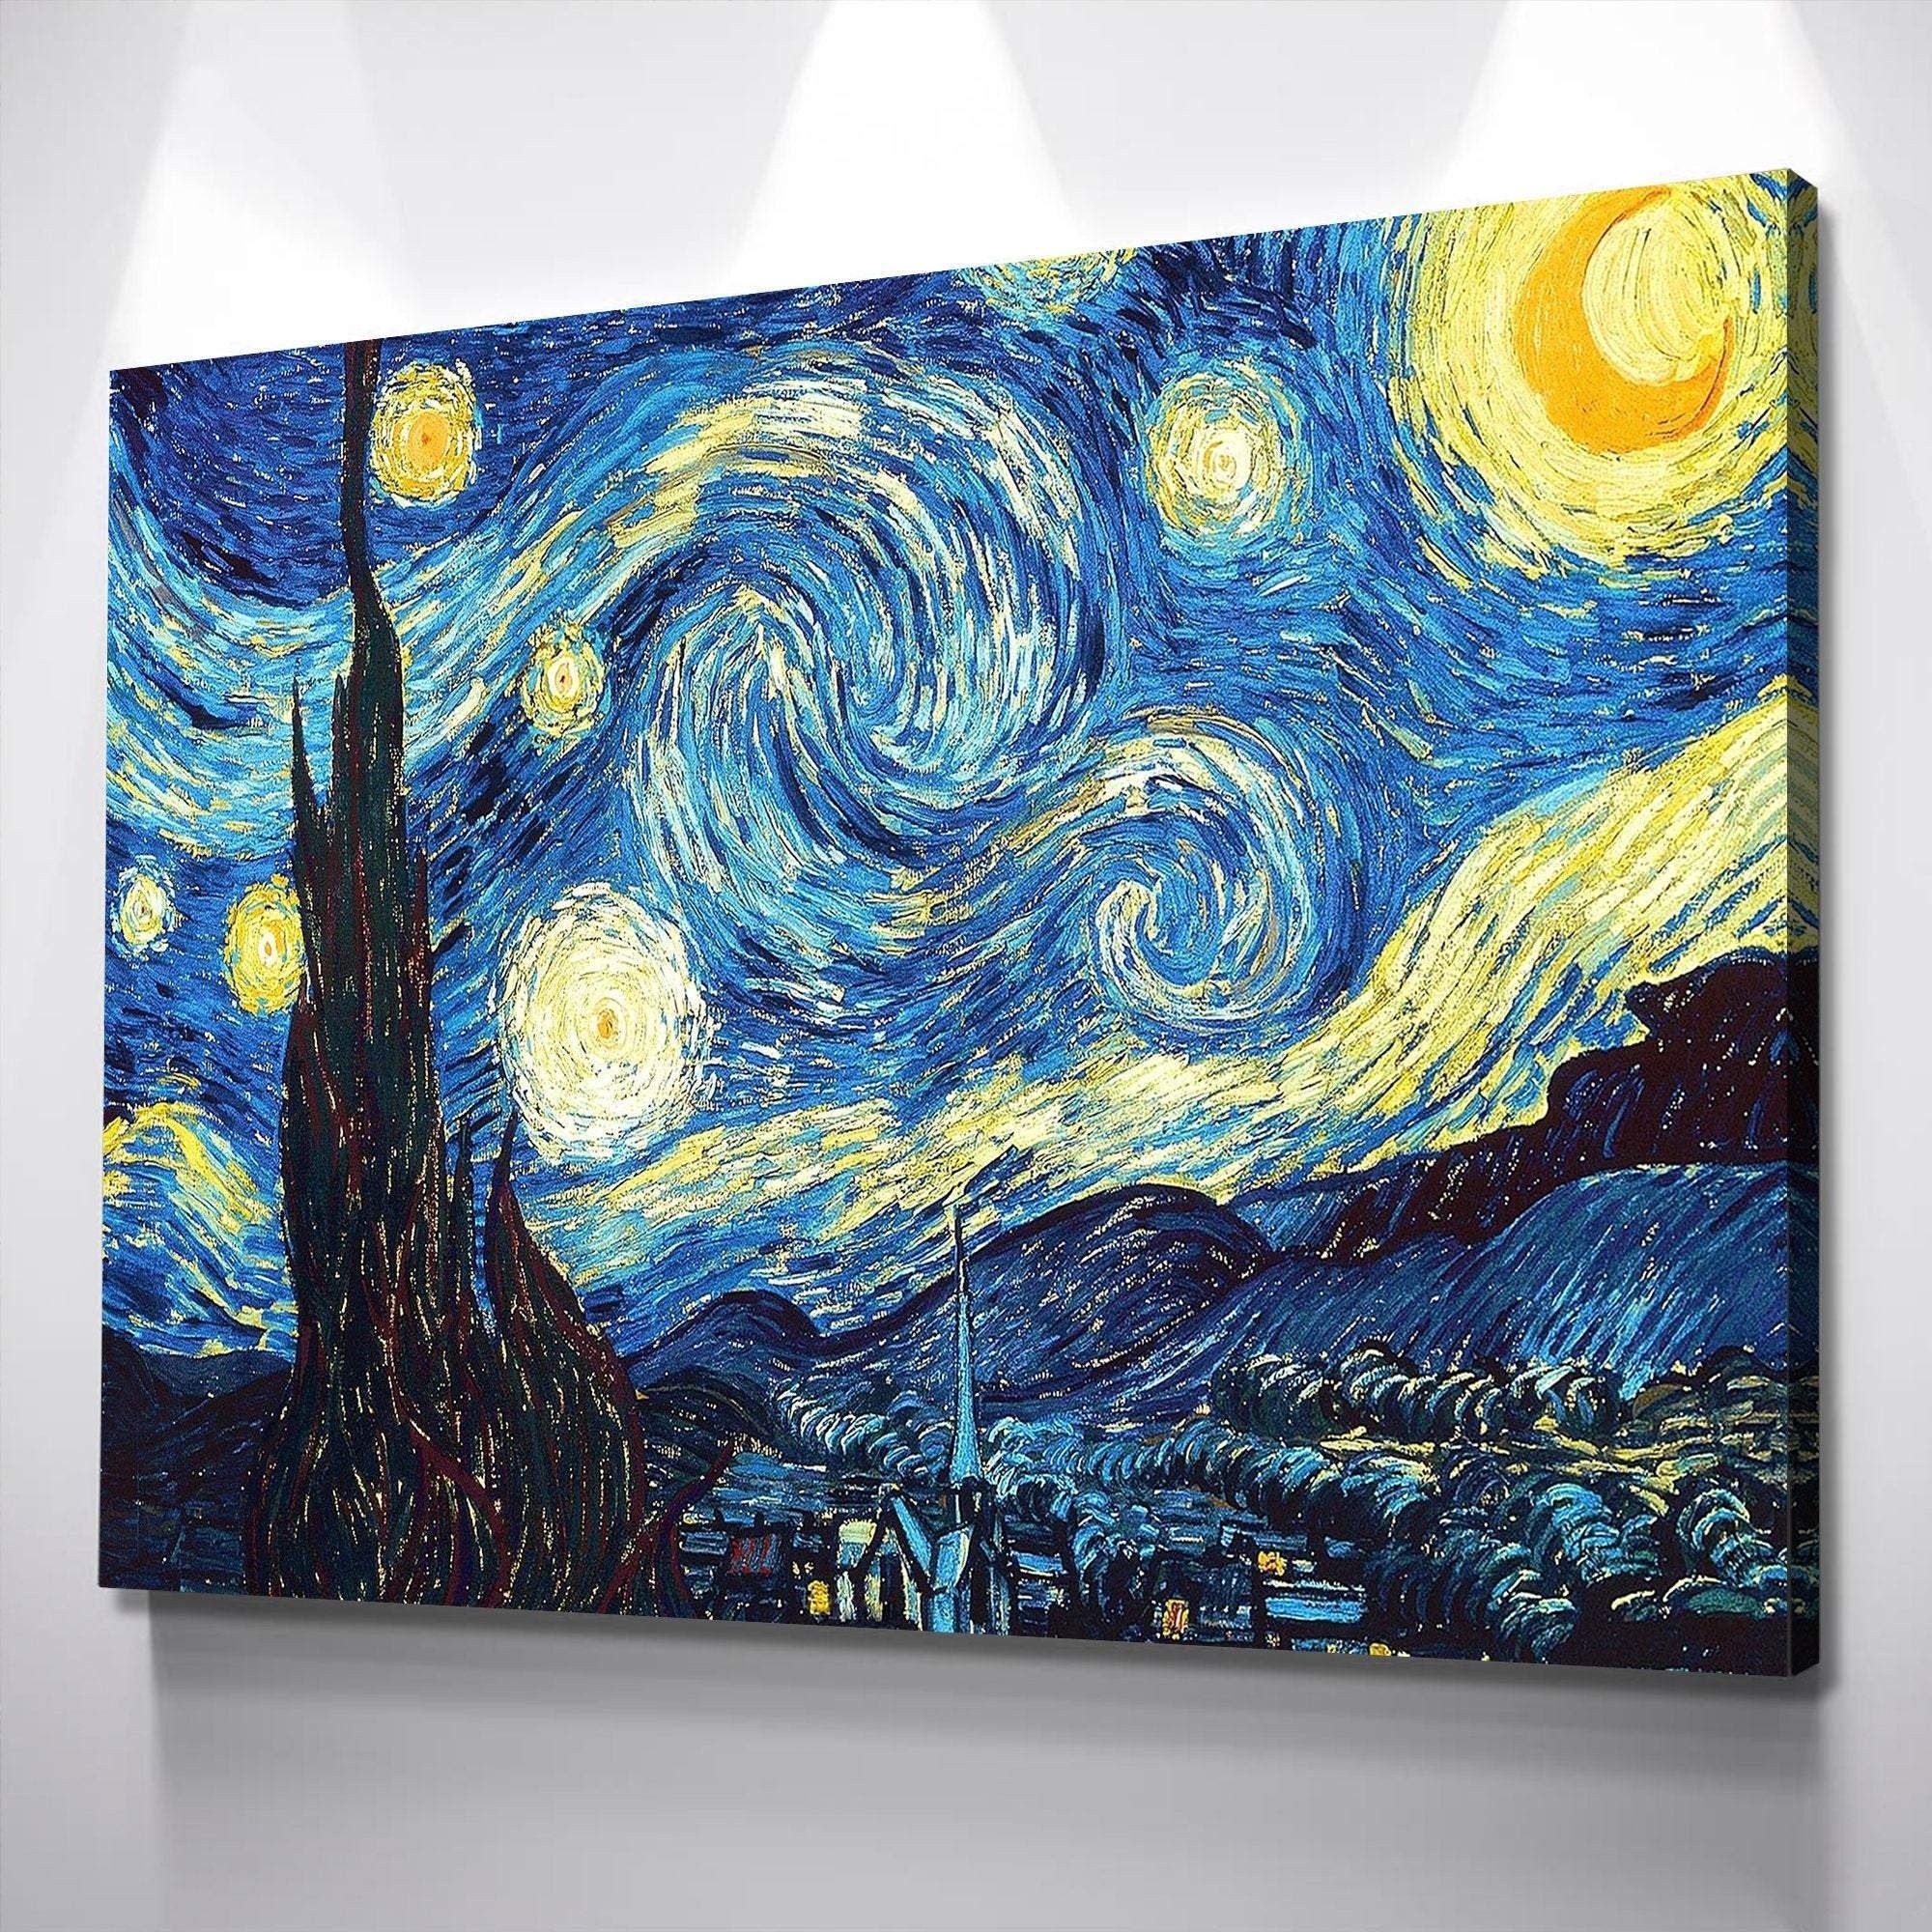 HD wallpaper, Fine Art Print, Vincent Van Gogh, 2000X2000 Hd Phone, Famous Painting, Mobile Hd The Starry Night Vincent Van Gogh Background Image, The Starry Night